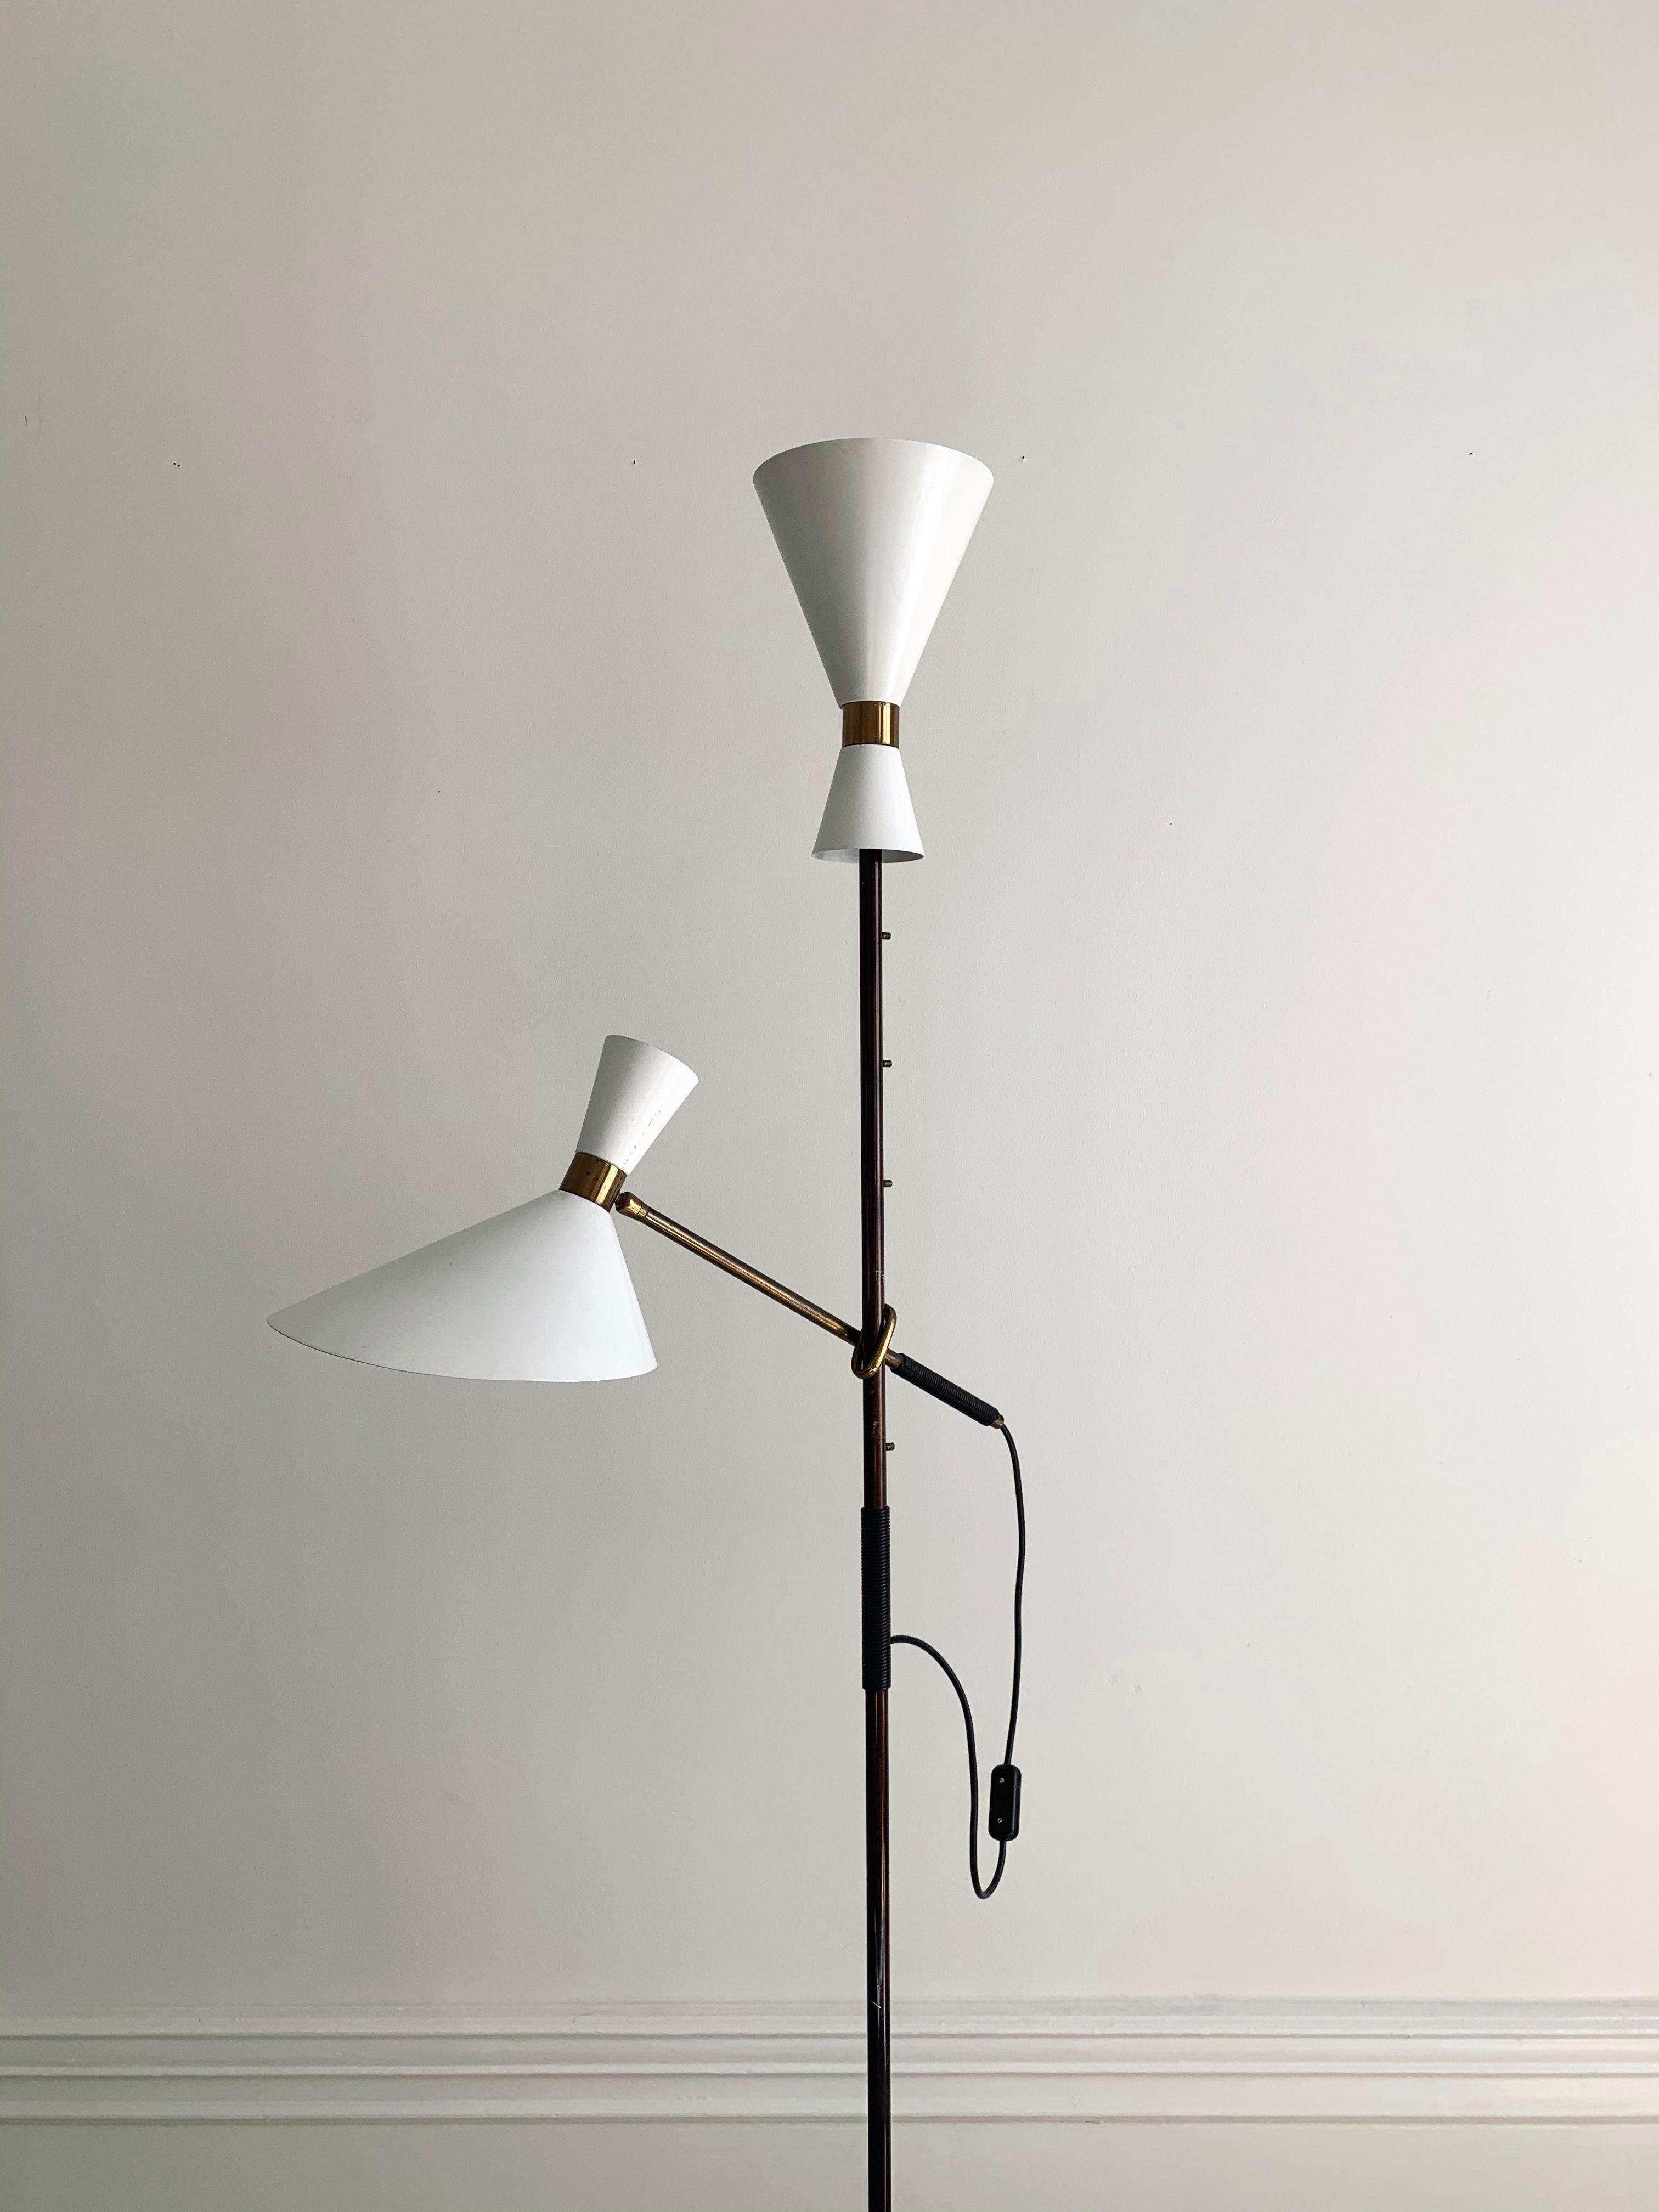 Rare floor lamp by J. T. Kalmar, Austria in good vintage condition and newer wiring.